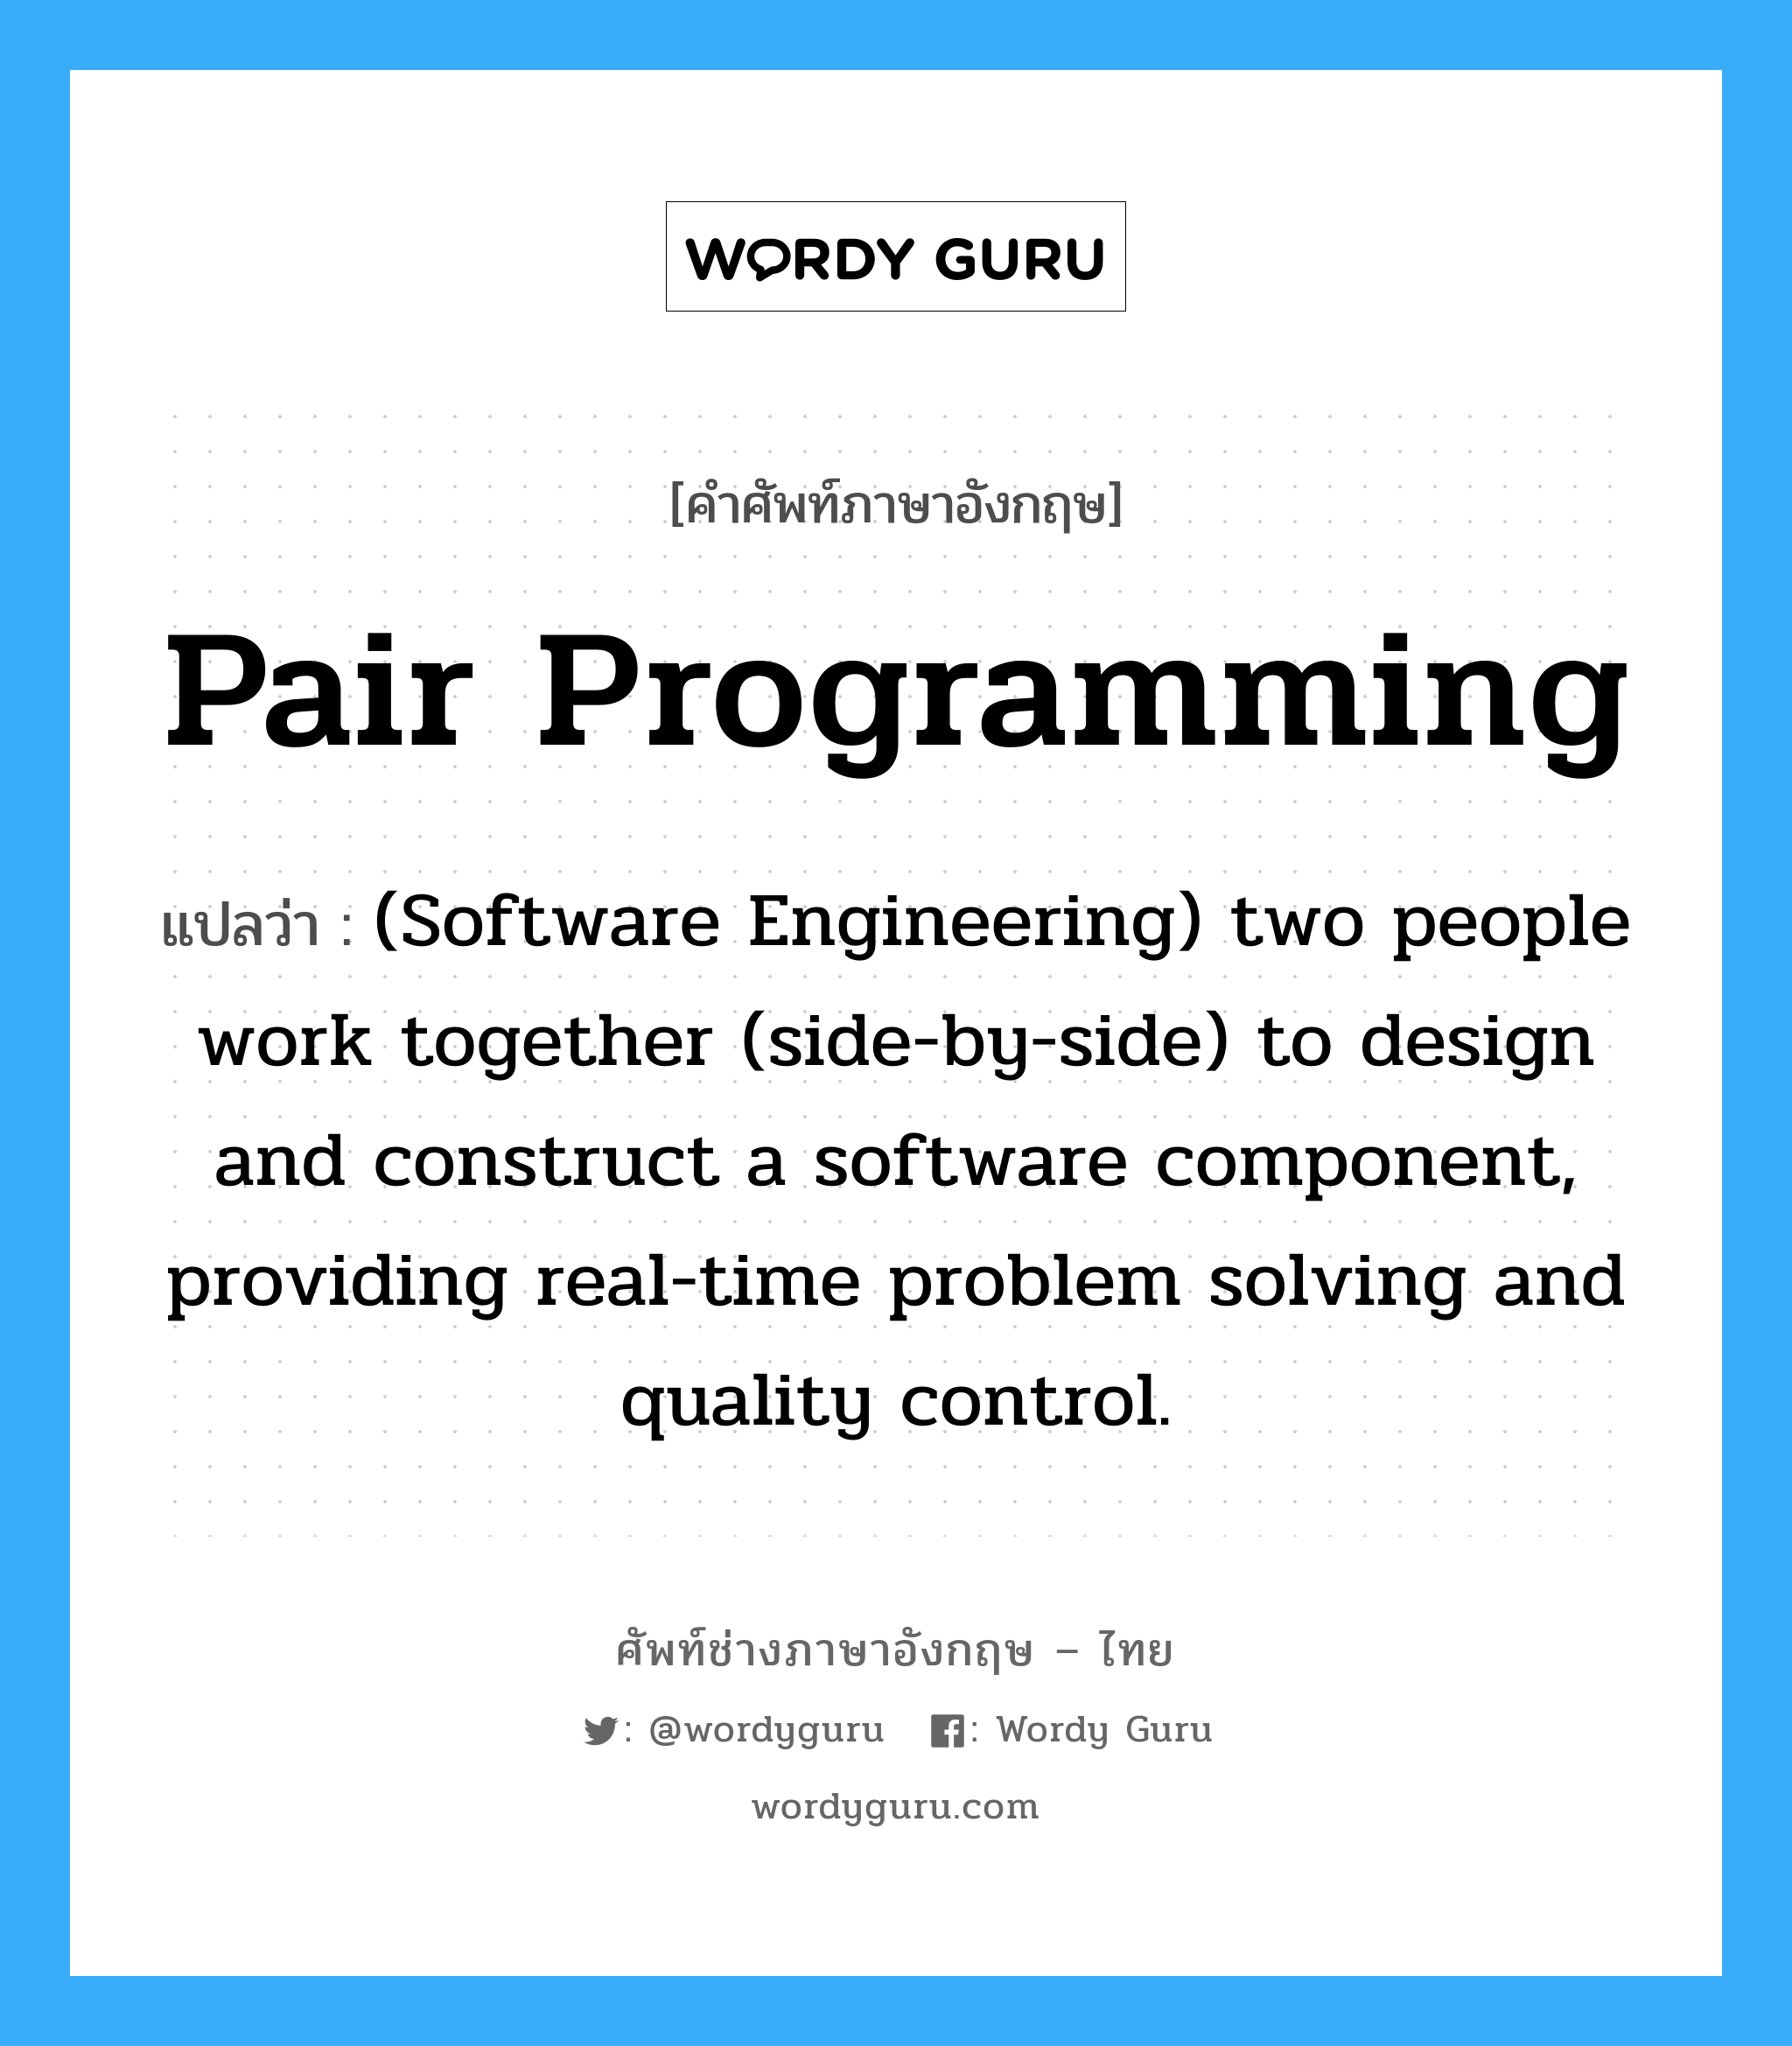 Pair programming แปลว่า?, คำศัพท์ช่างภาษาอังกฤษ - ไทย Pair programming คำศัพท์ภาษาอังกฤษ Pair programming แปลว่า (Software Engineering) two people work together (side-by-side) to design and construct a software component, providing real-time problem solving and quality control.